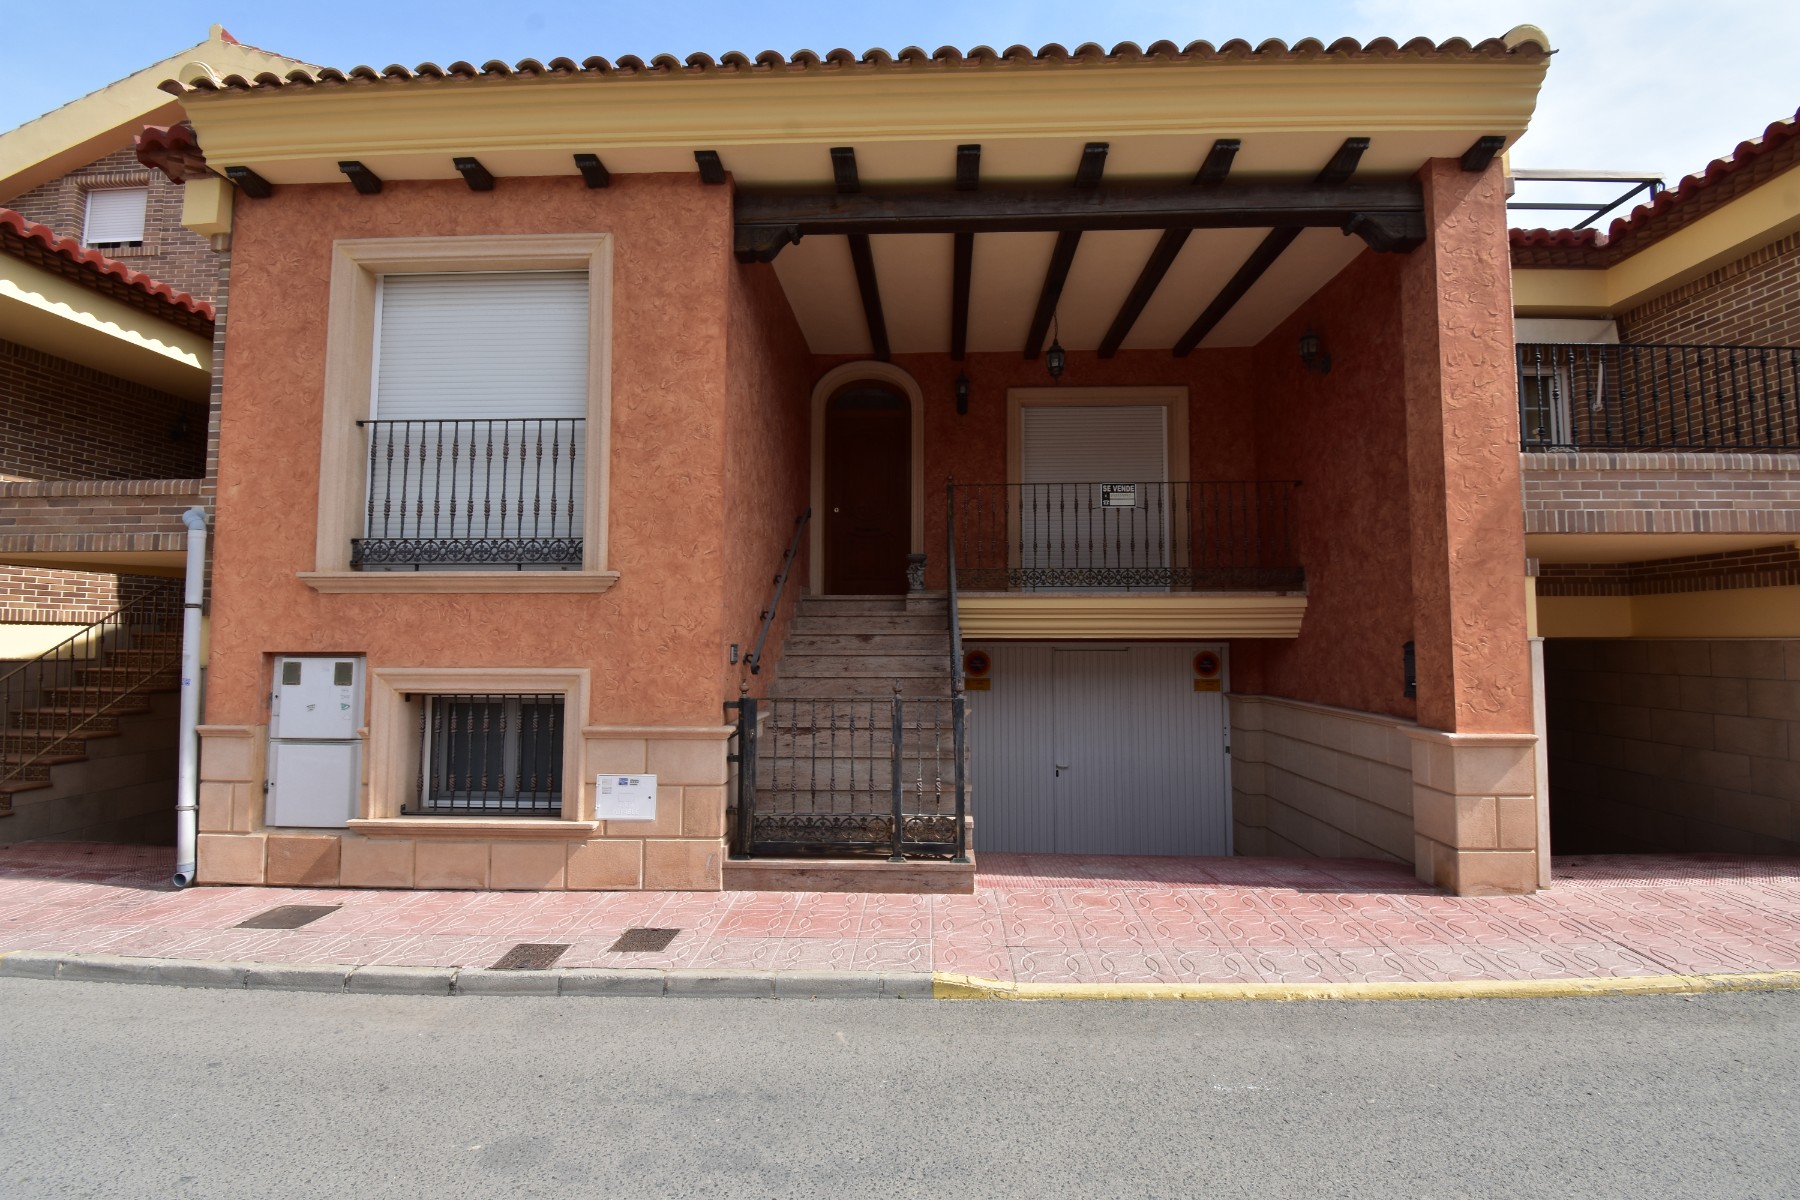 For sale: 3 bedroom house / villa in Rojales